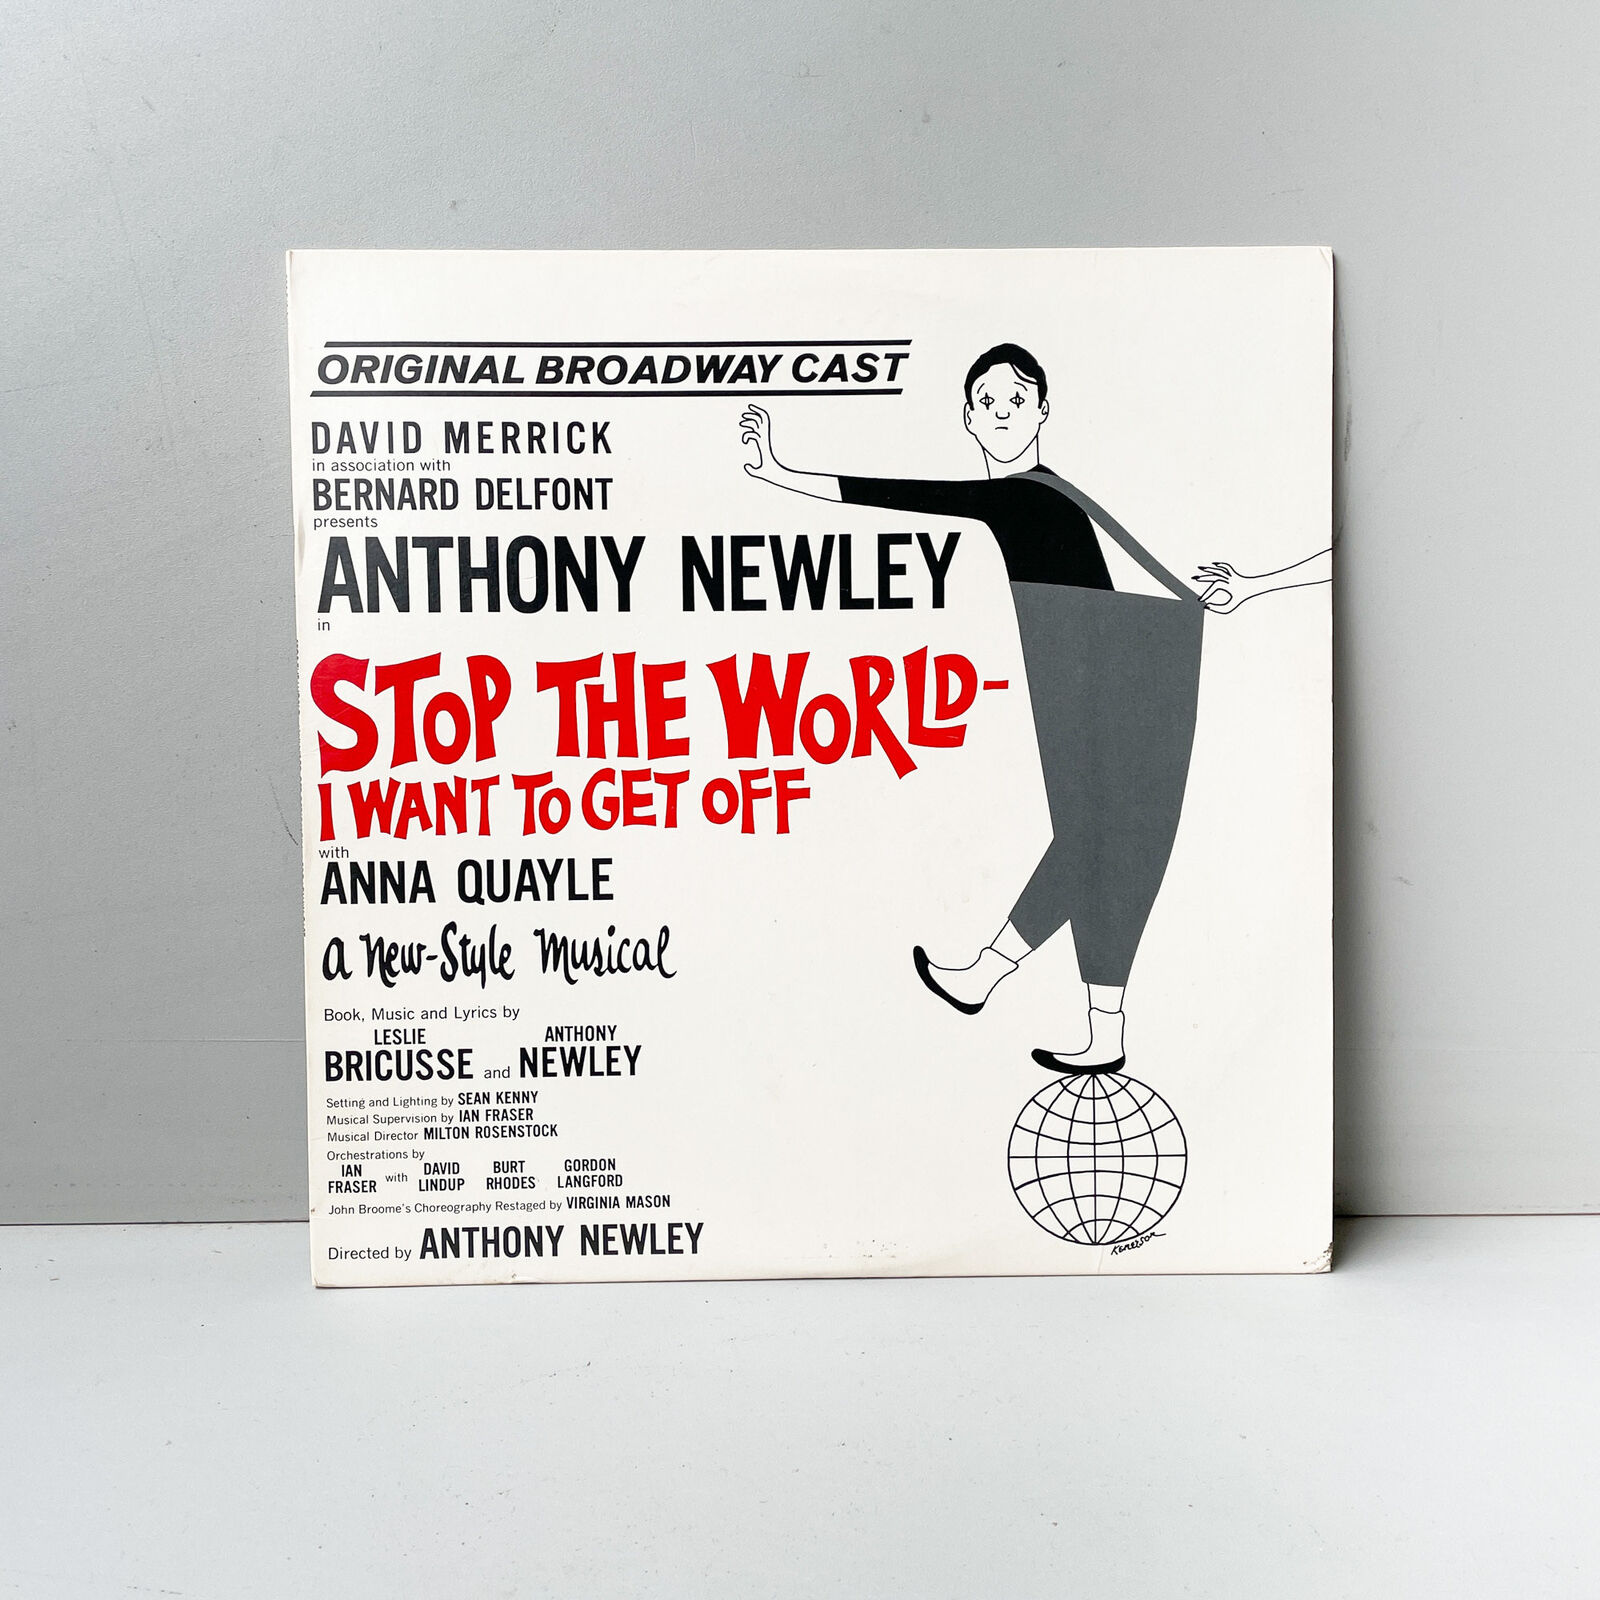 Anthony Newley With Anna Quayle – Stop The World - I Want To Get Off - Vinyl LP